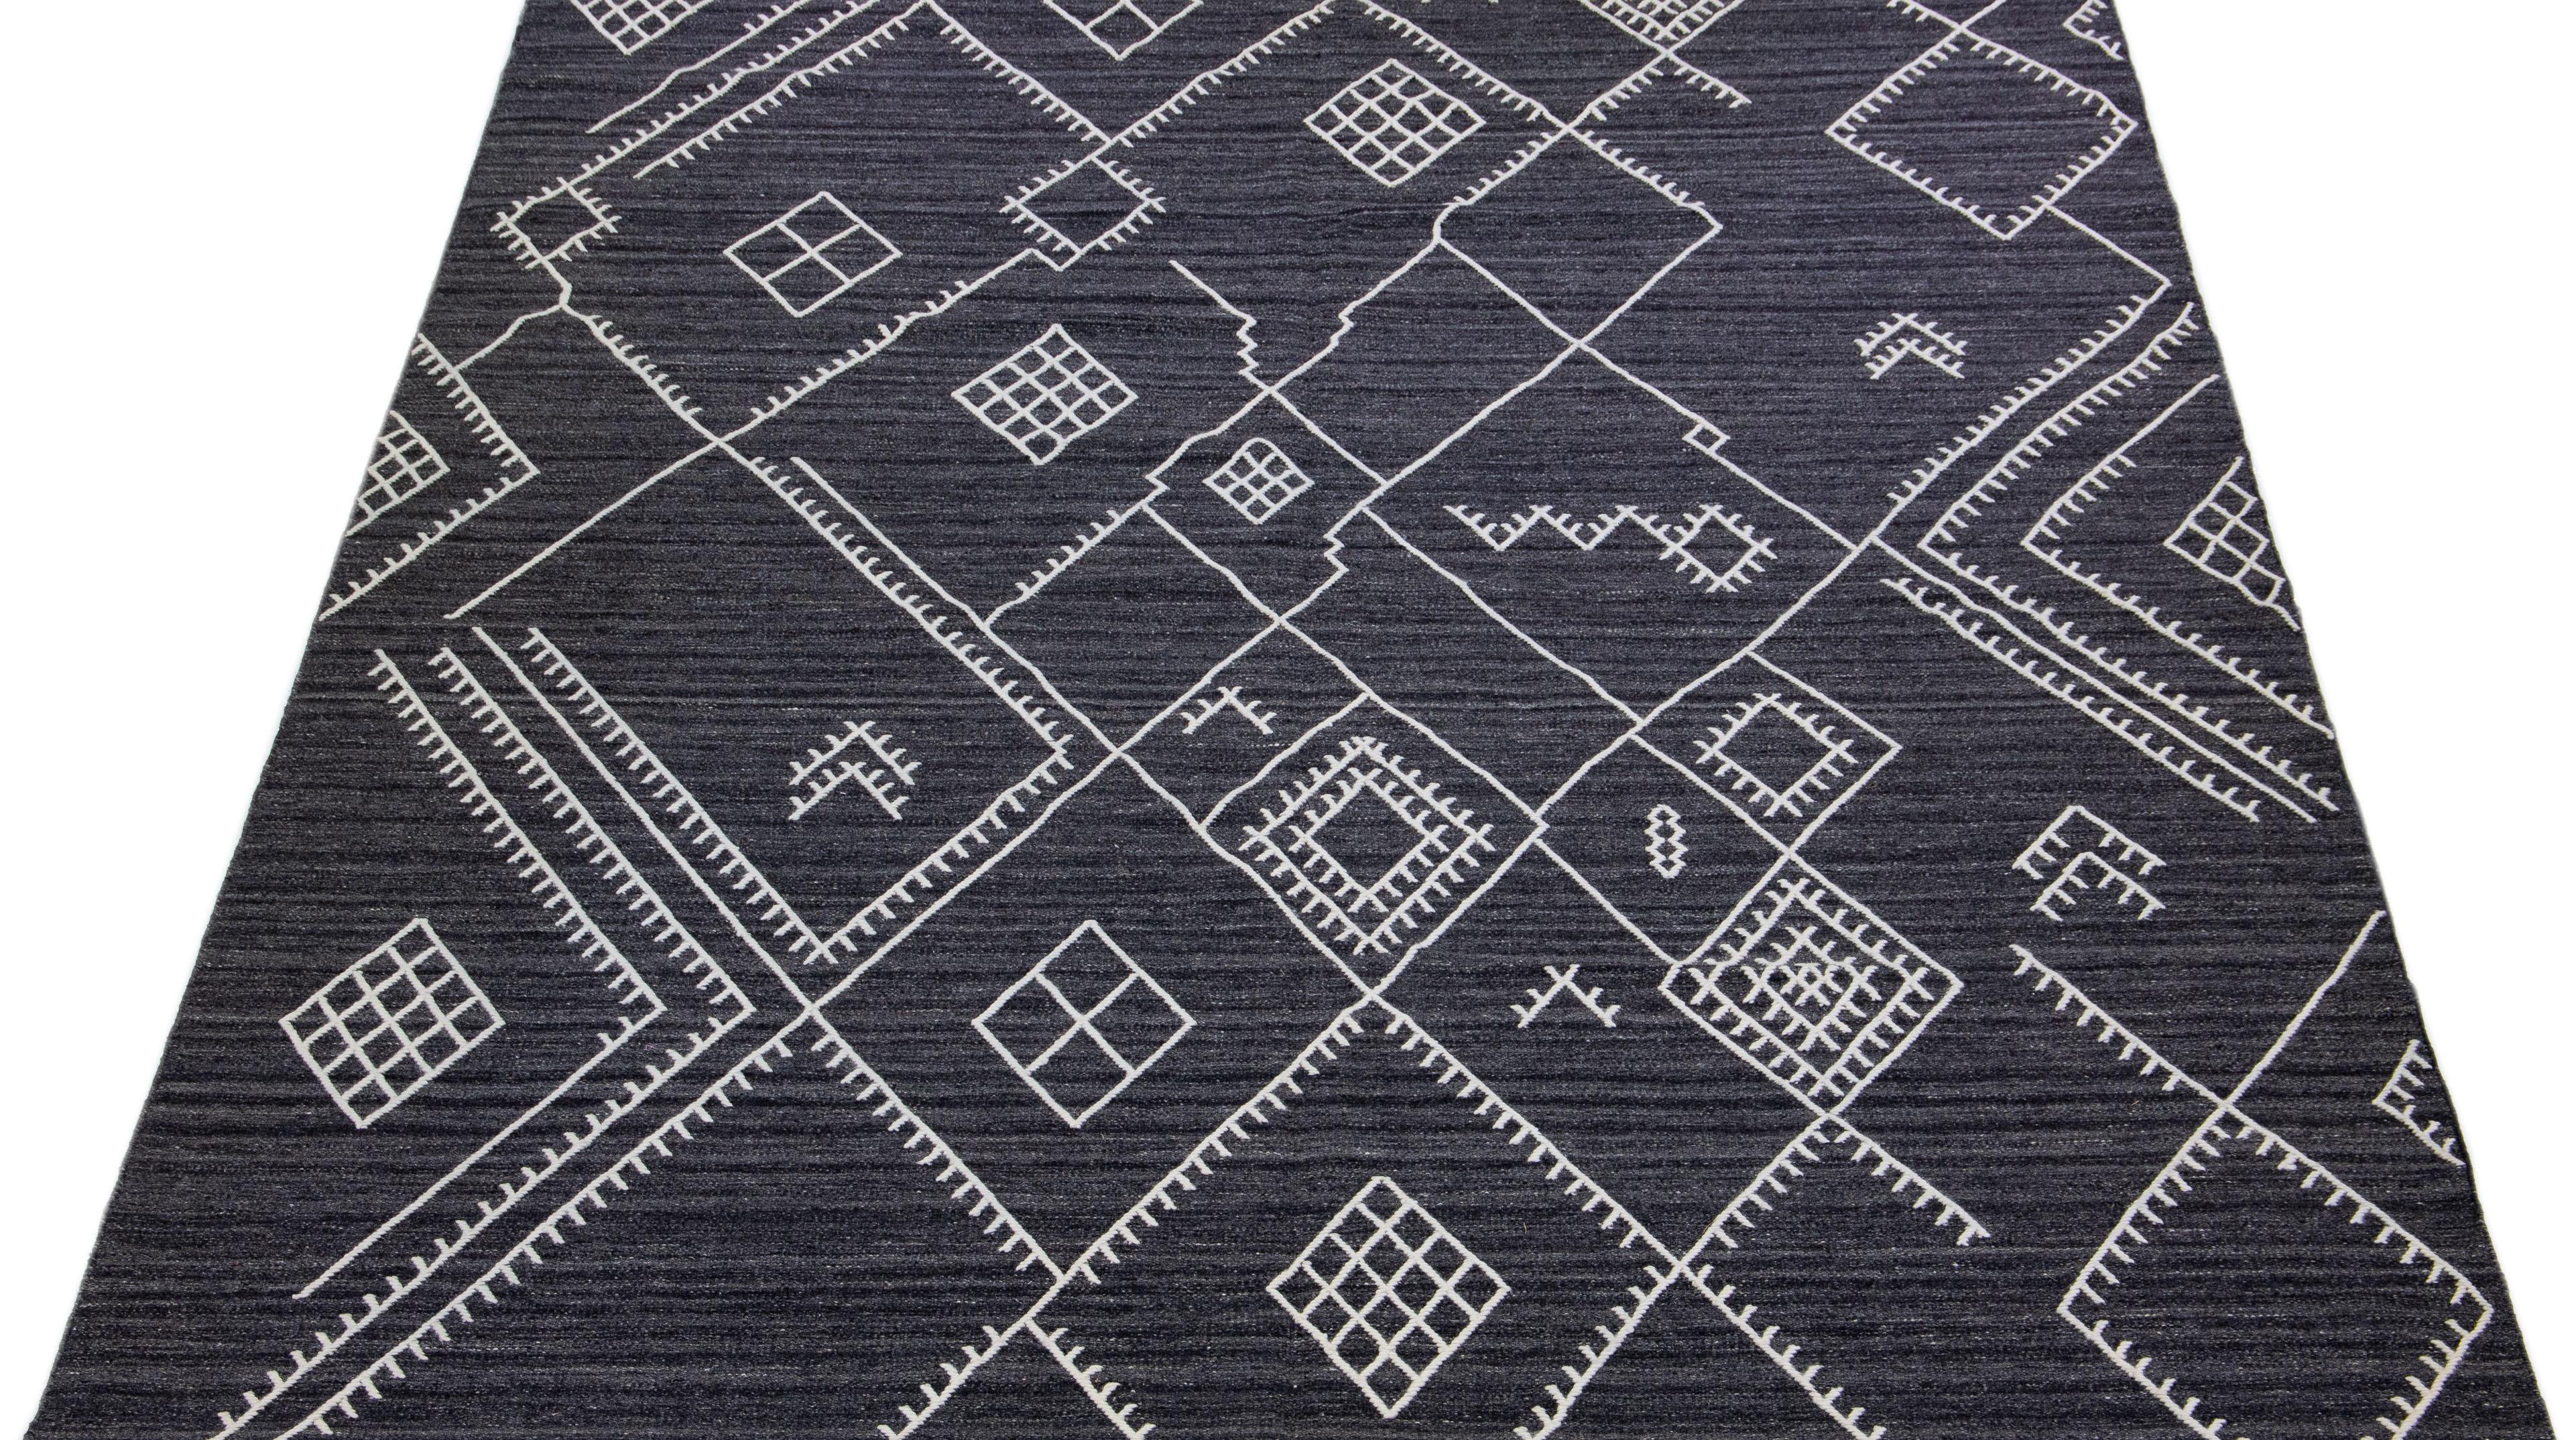 Beautiful kilim handmade wool rug with a gray-charcoal field. This custom modern flatweave rug of our Nantucket collection has white accents and a gorgeous, all-over geometric coastal design.

This rug measures: 10' x 13'9